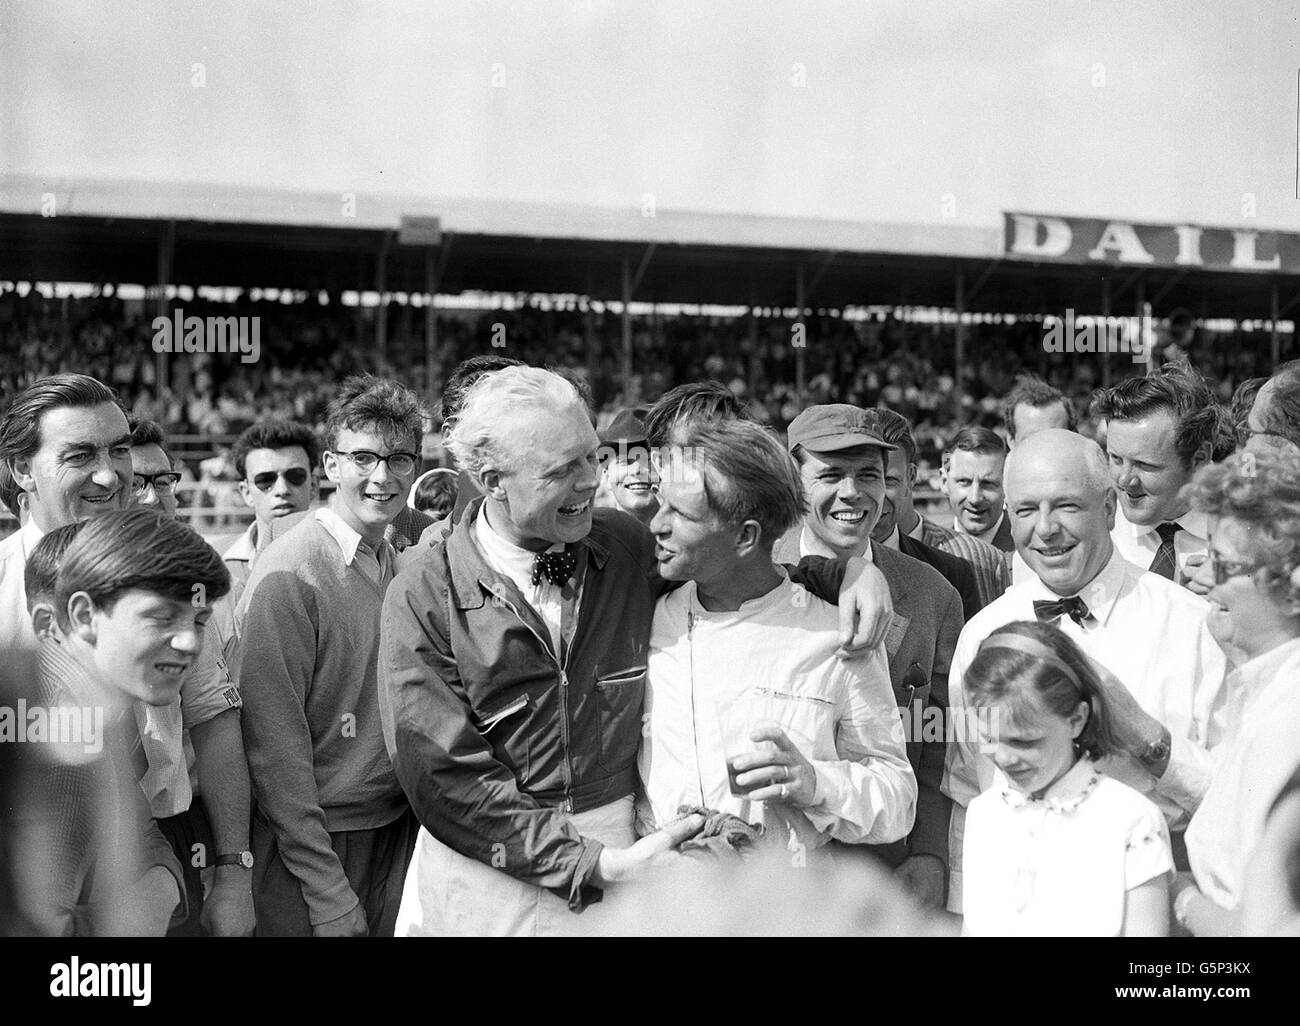 Peter Collins, winner of the British Grand Prix at Silverstone,is congratulated by runner up Mike Hawthorn. Collins, driving a Ferrari, won at an average speed of 102.05 miles an hour. Stock Photo